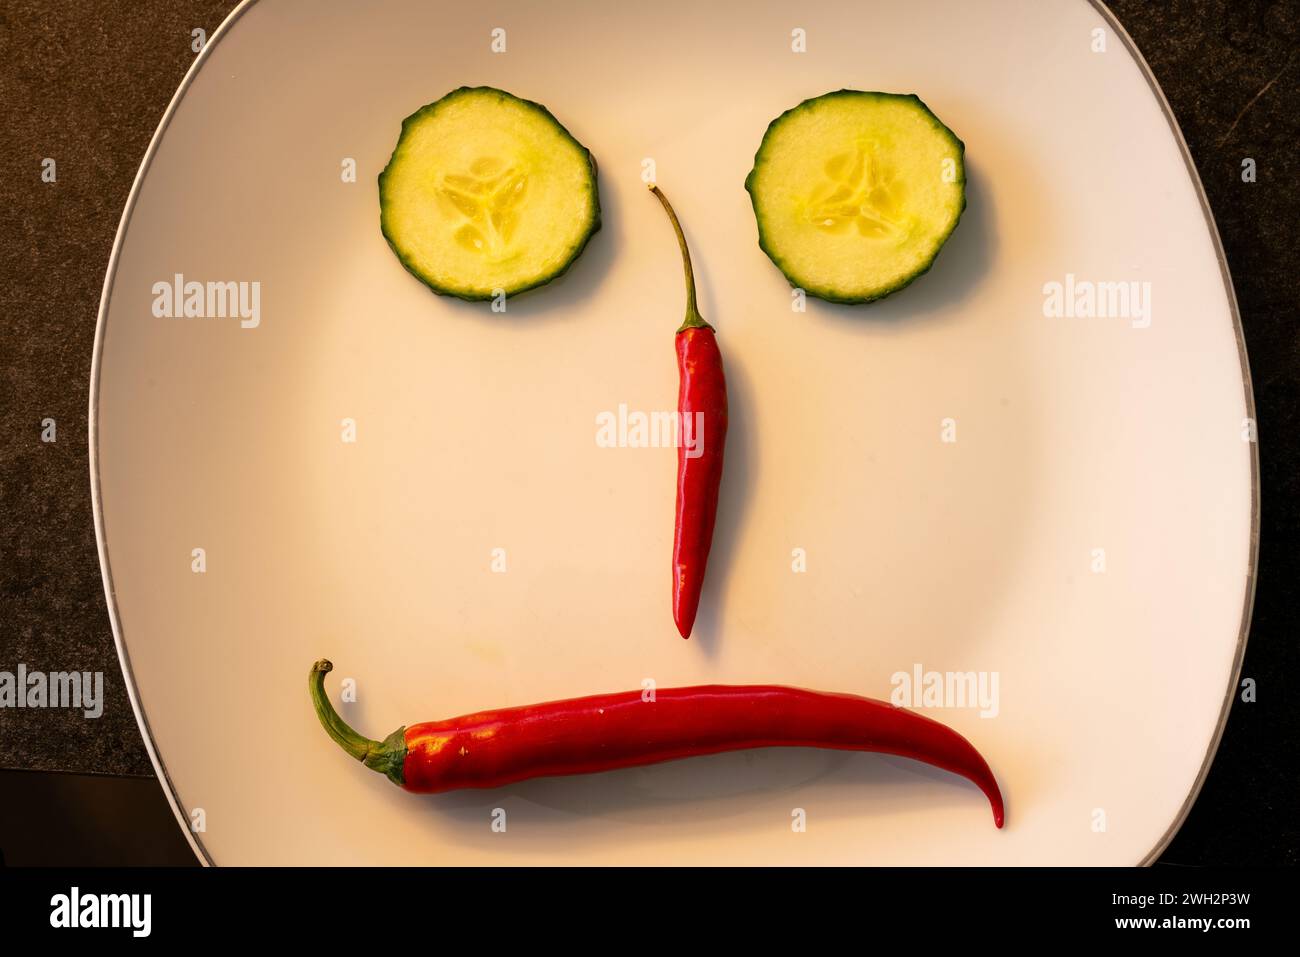 Frowning sad face arranged on a plate with red chili peppers and slices of snake cucumber. Stock Photo